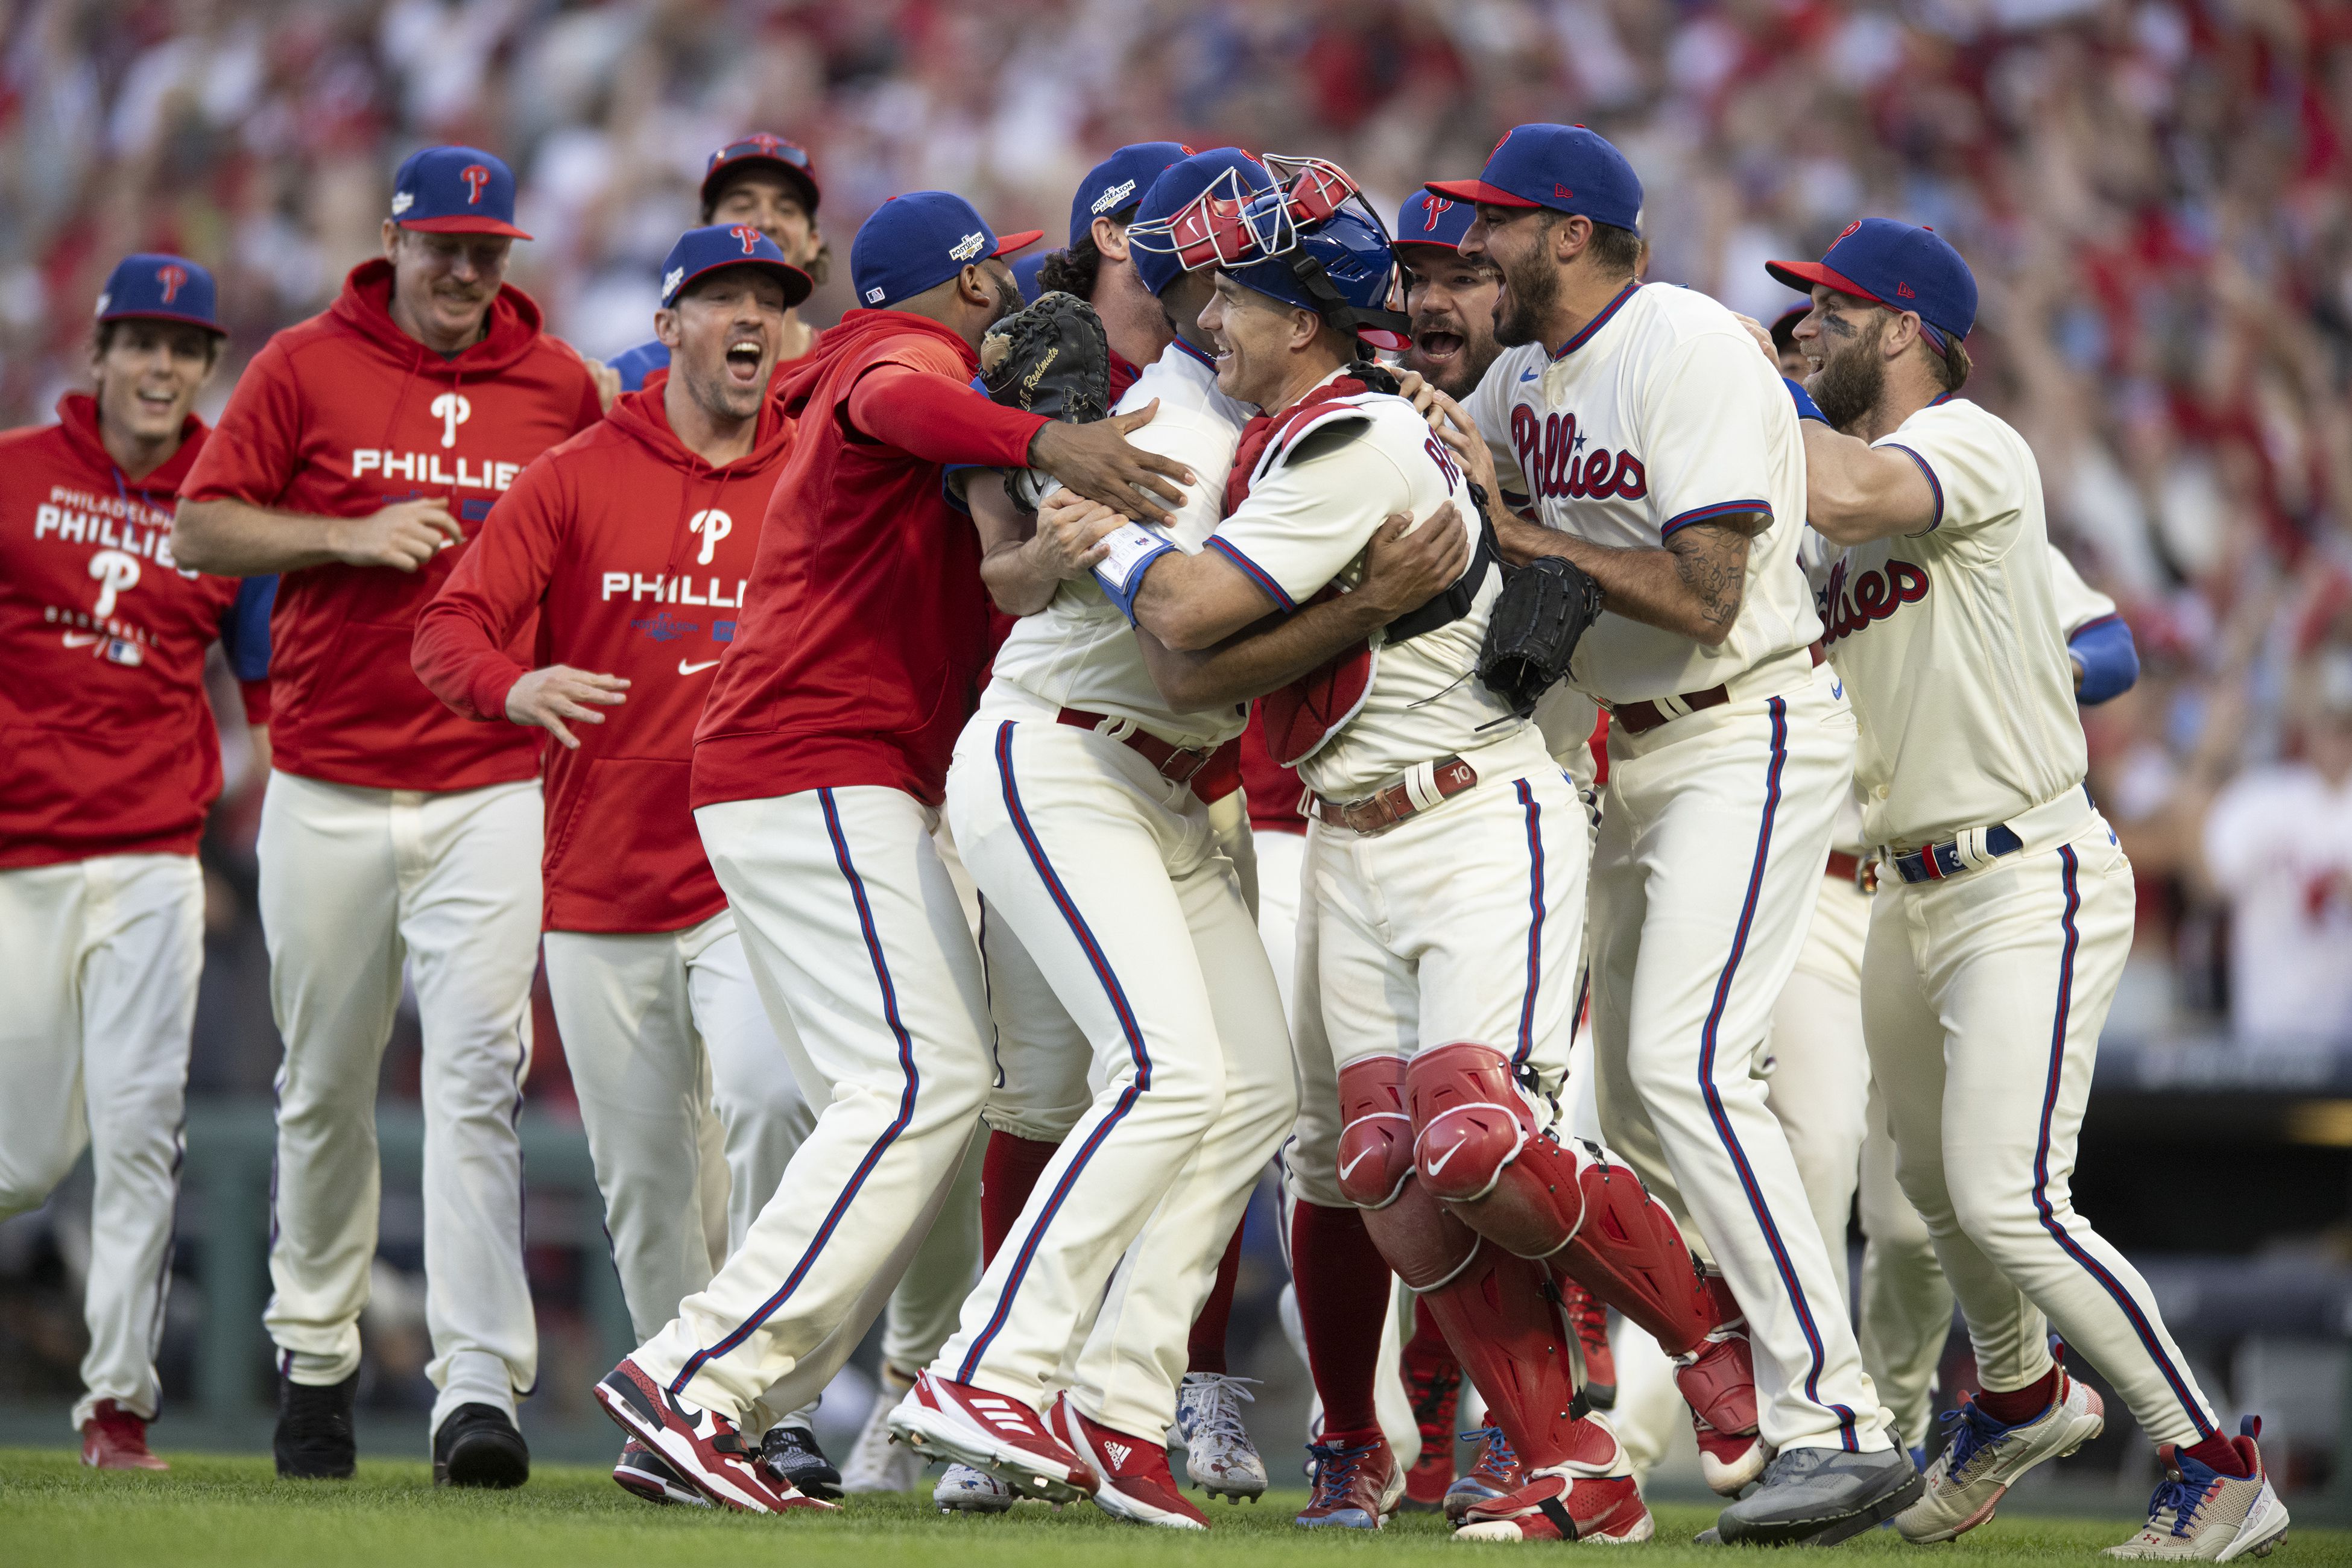 Owner John Middleton: Can you believe this? It's magical! as his unlikely  Phillies win the NLDS